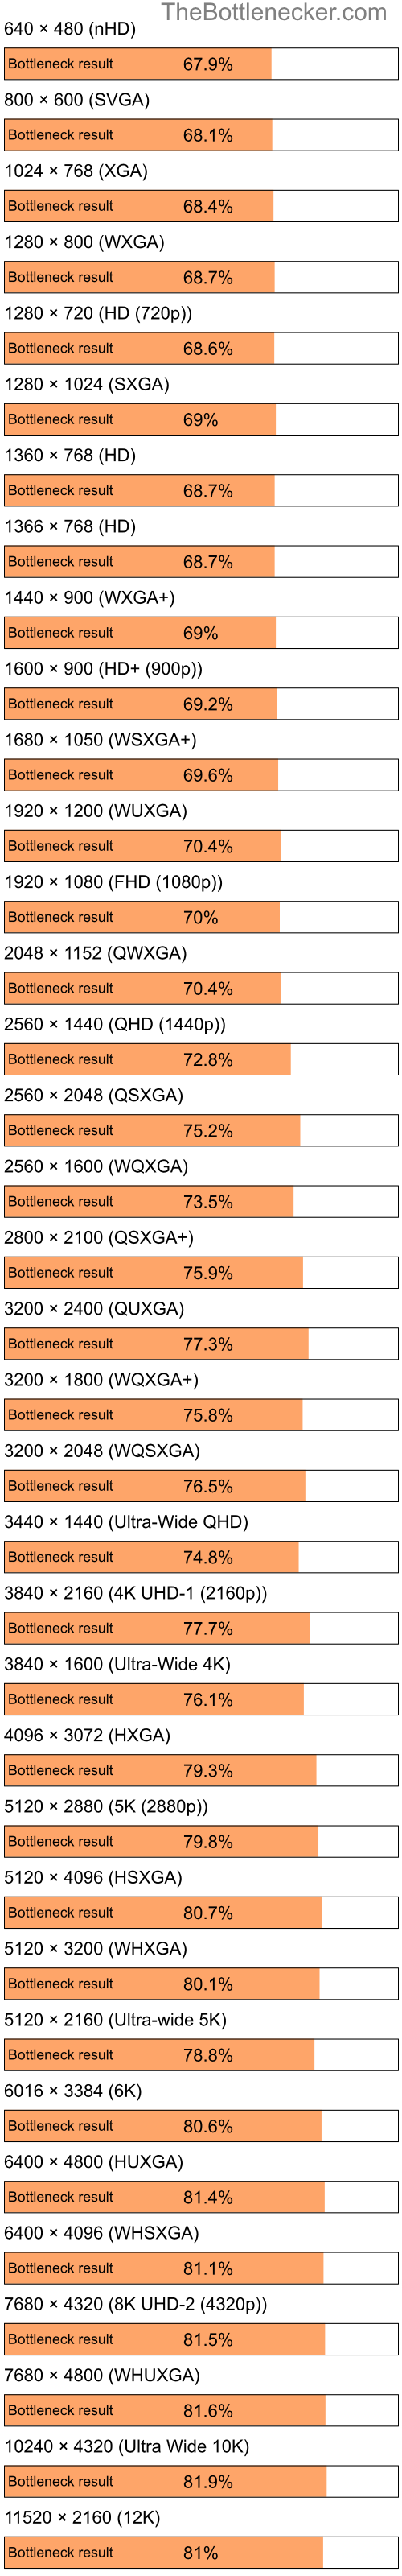 Bottleneck results by resolution for Intel Celeron M 410 and NVIDIA GeForce 9200M GS in Graphic Card Intense Tasks